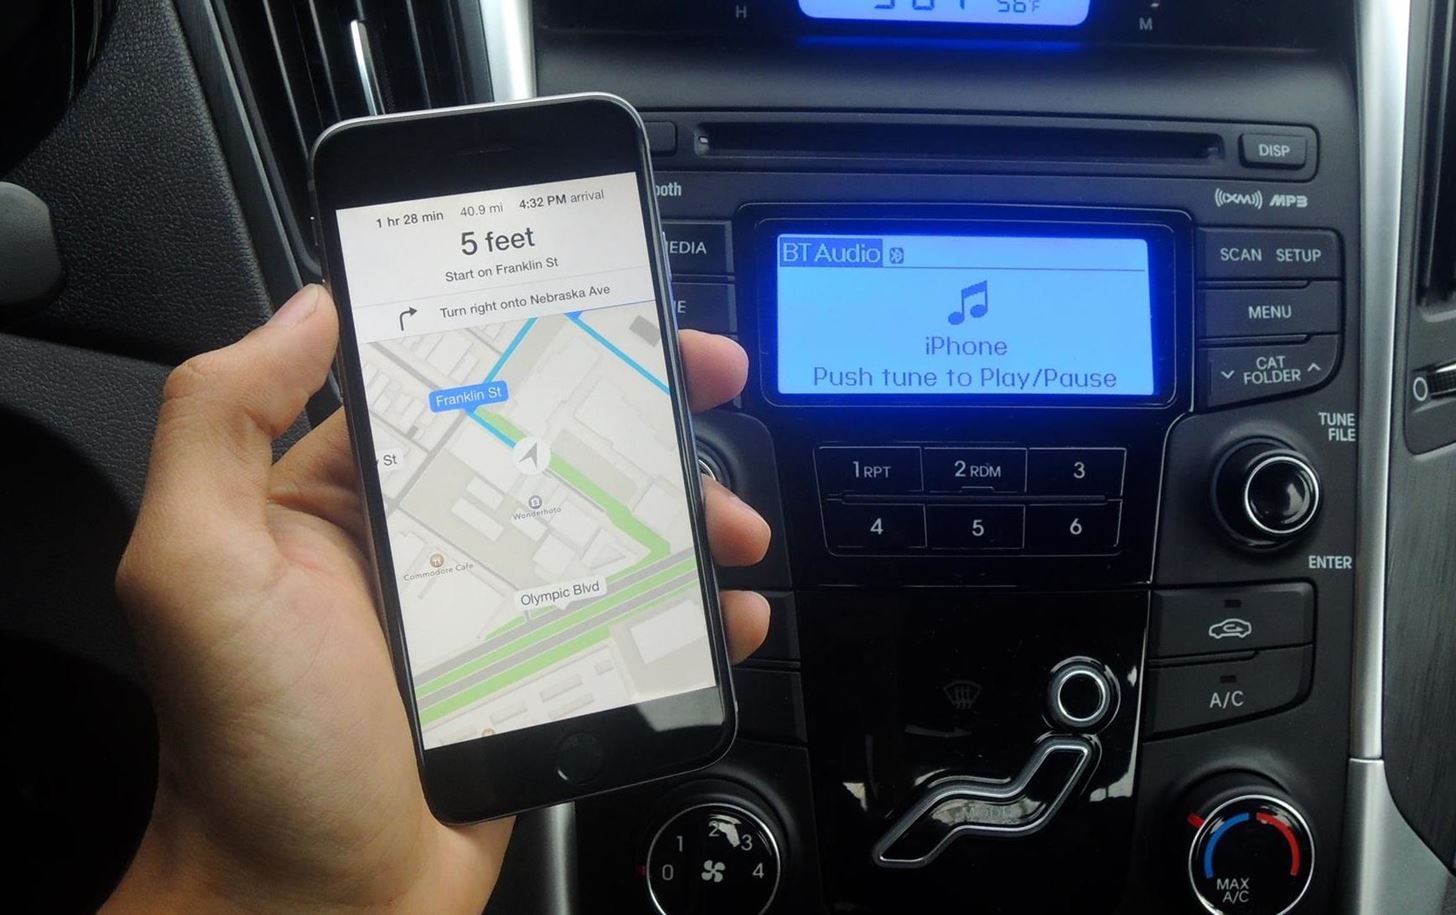 Automatically Pause Music During Spoken Maps Directions on Your iPhone